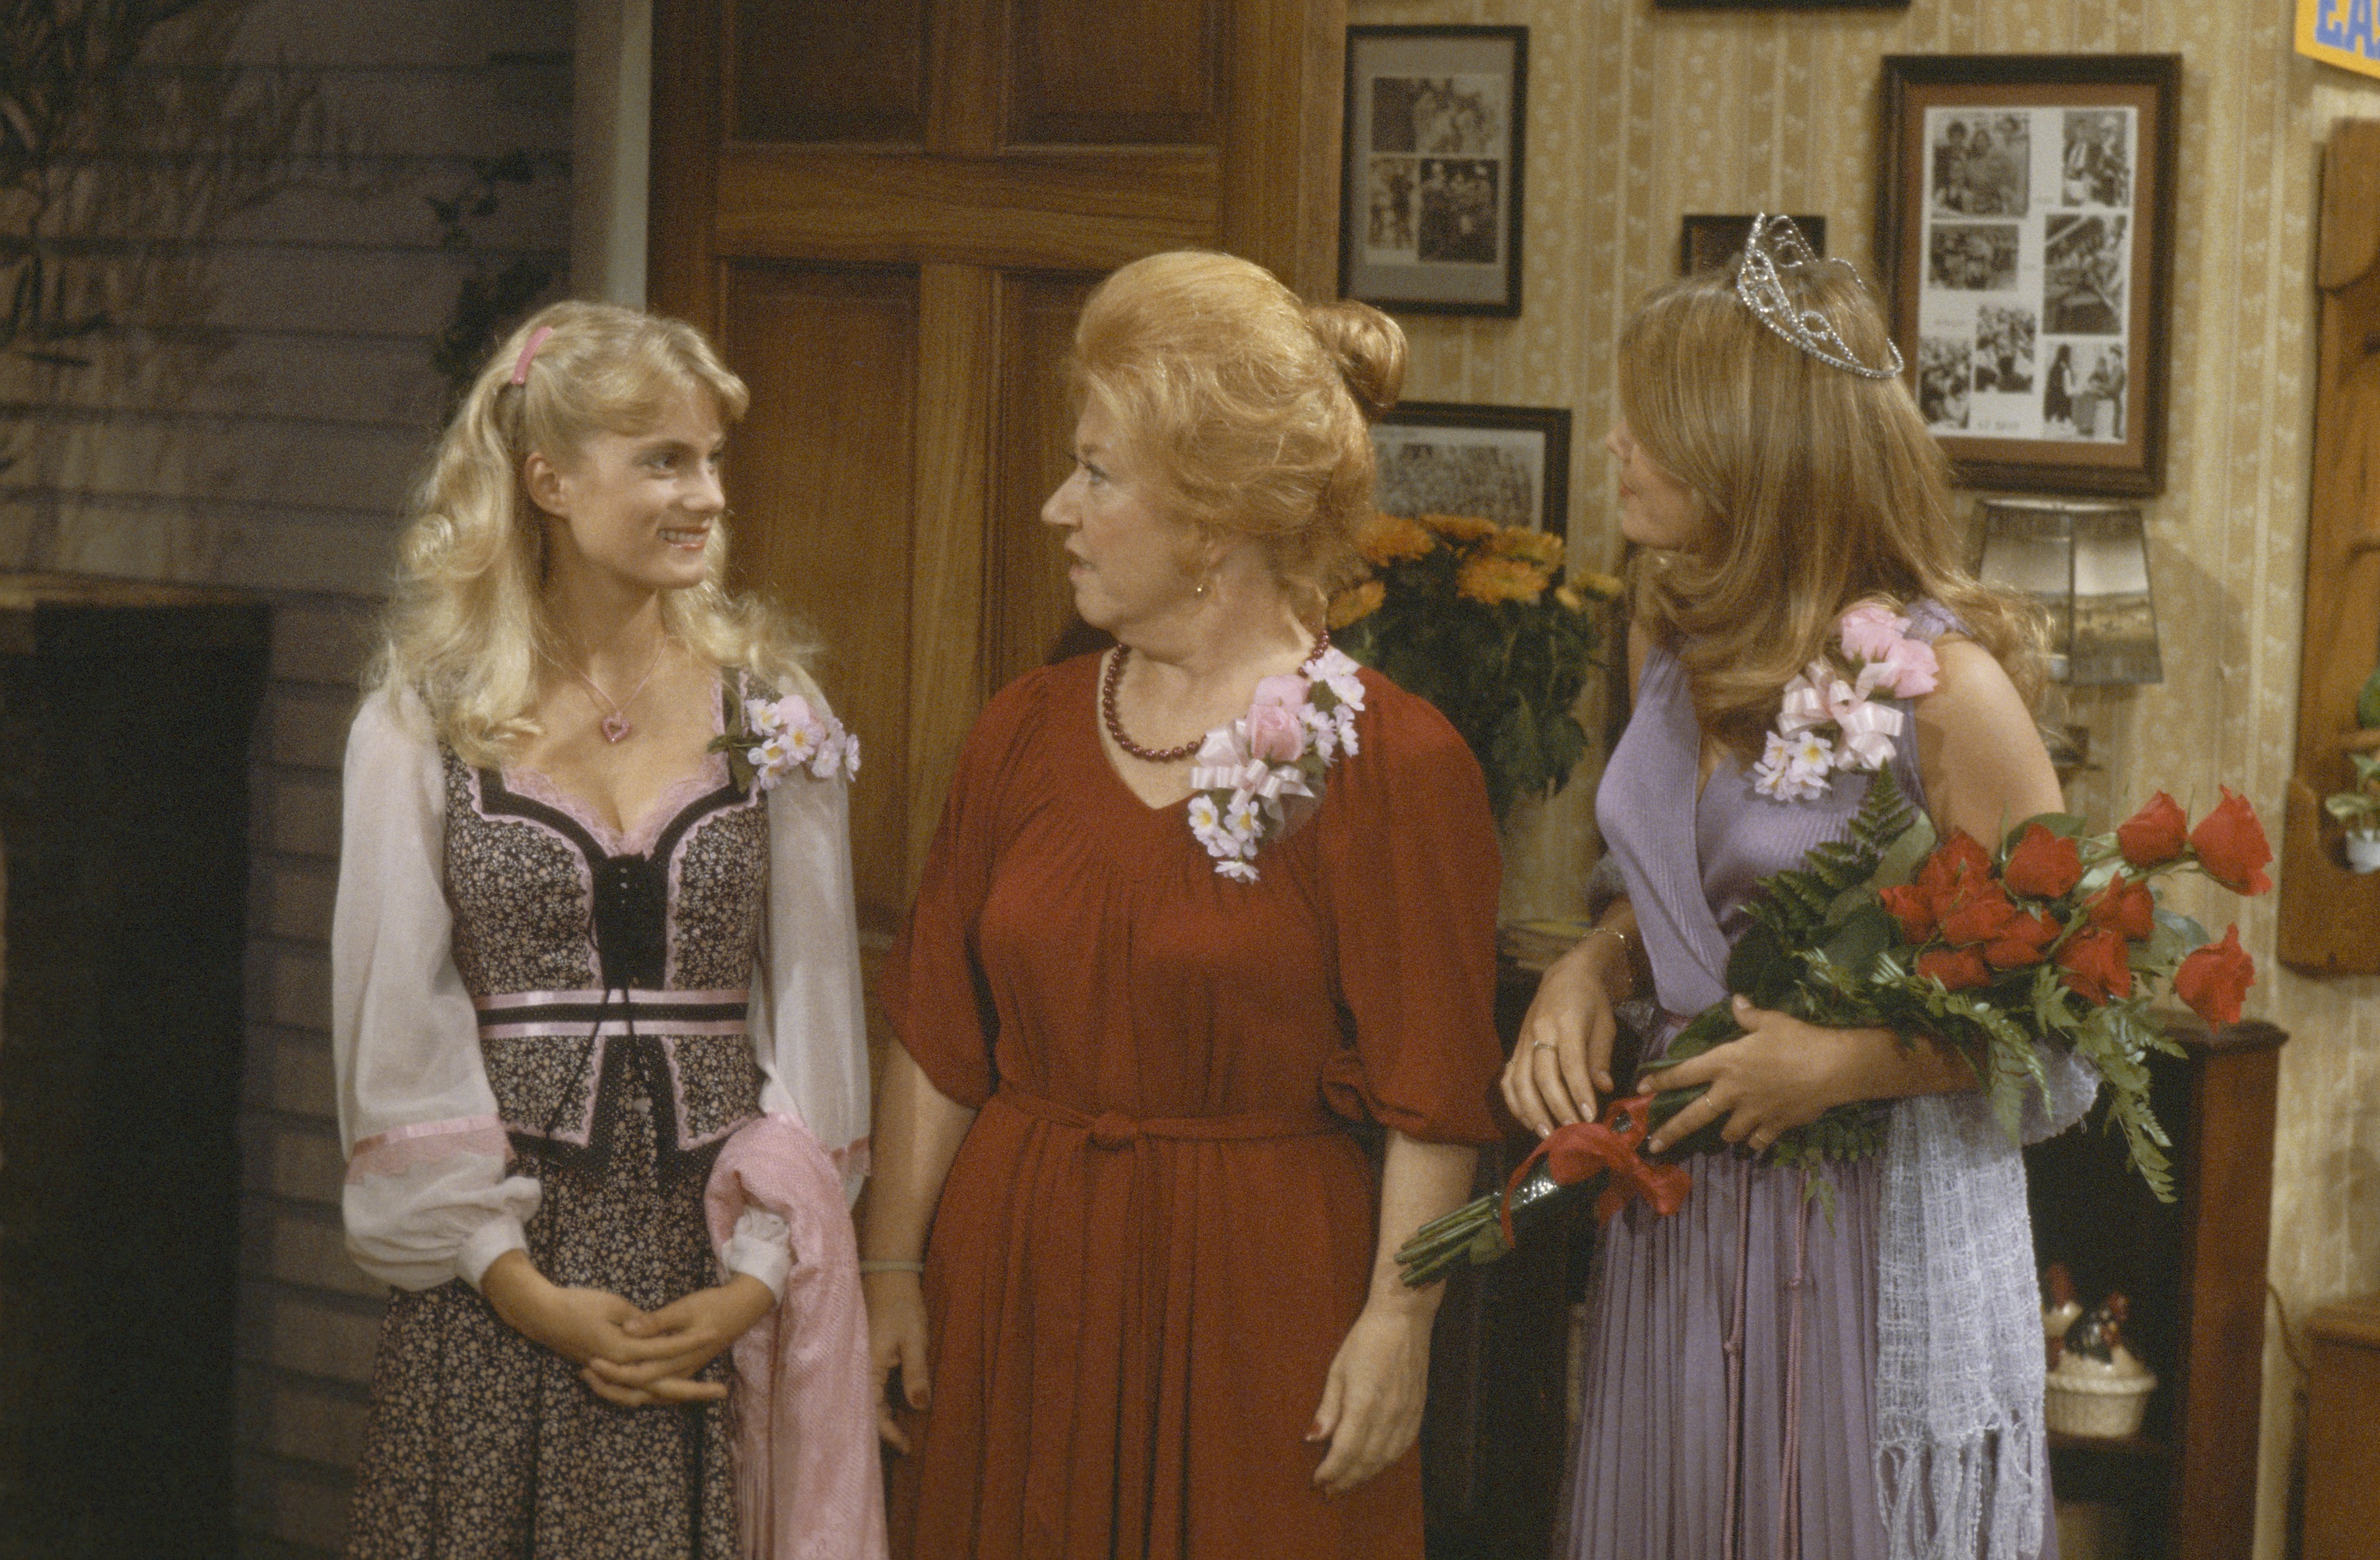 Anne Haddock, Charlotte Rae and Lisa Whelchel on the set of "The Facts of Life," 1979 | Source: Getty Images